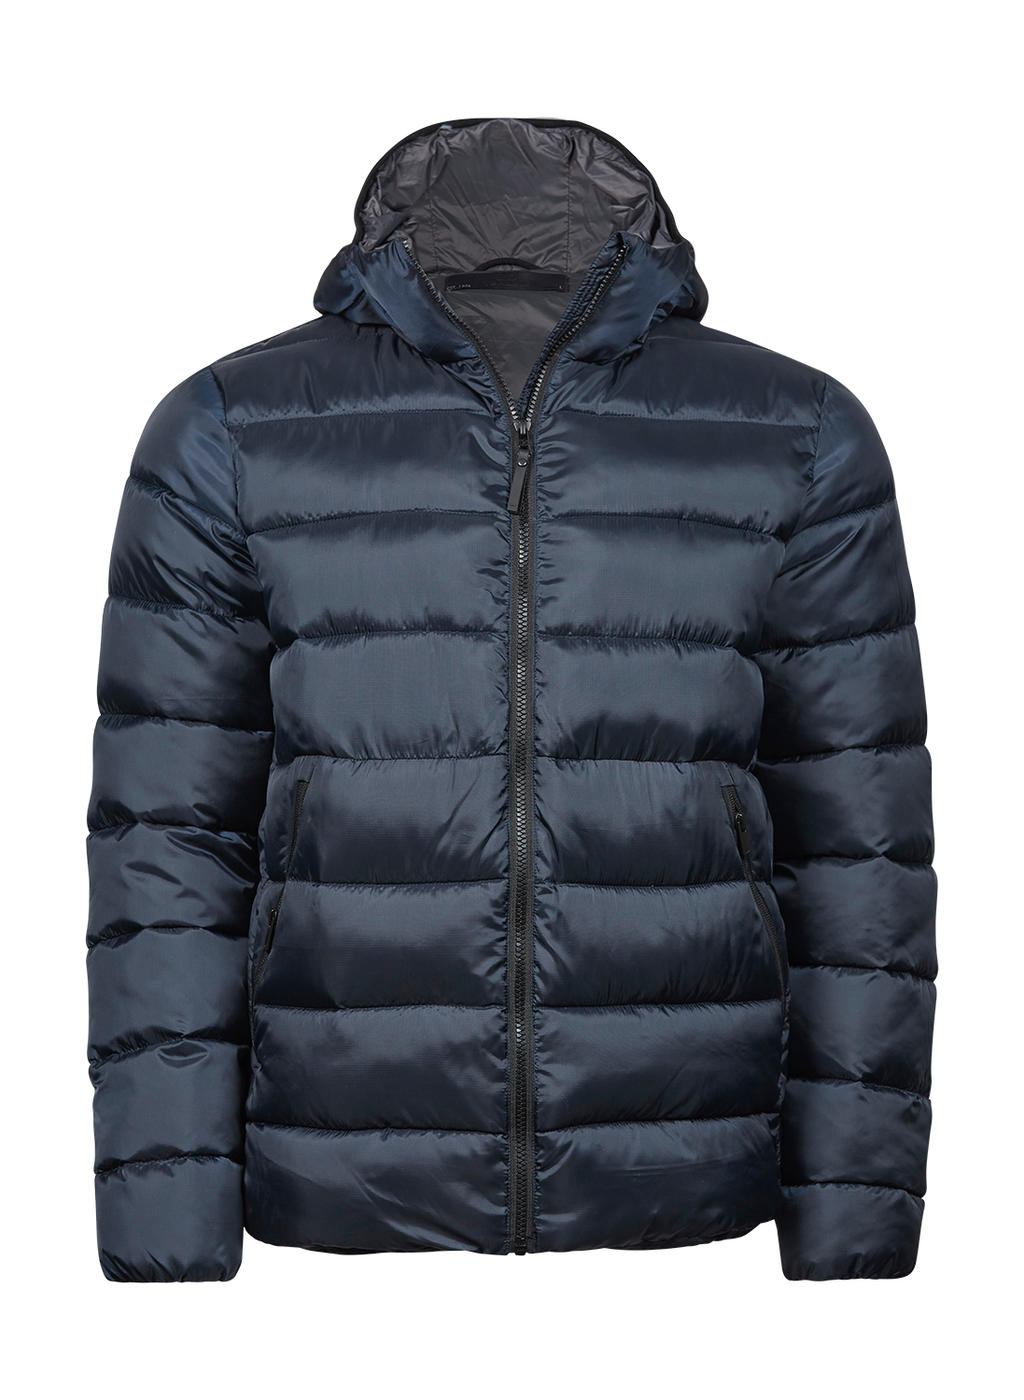  Lite Hooded Jacket in Farbe Navy